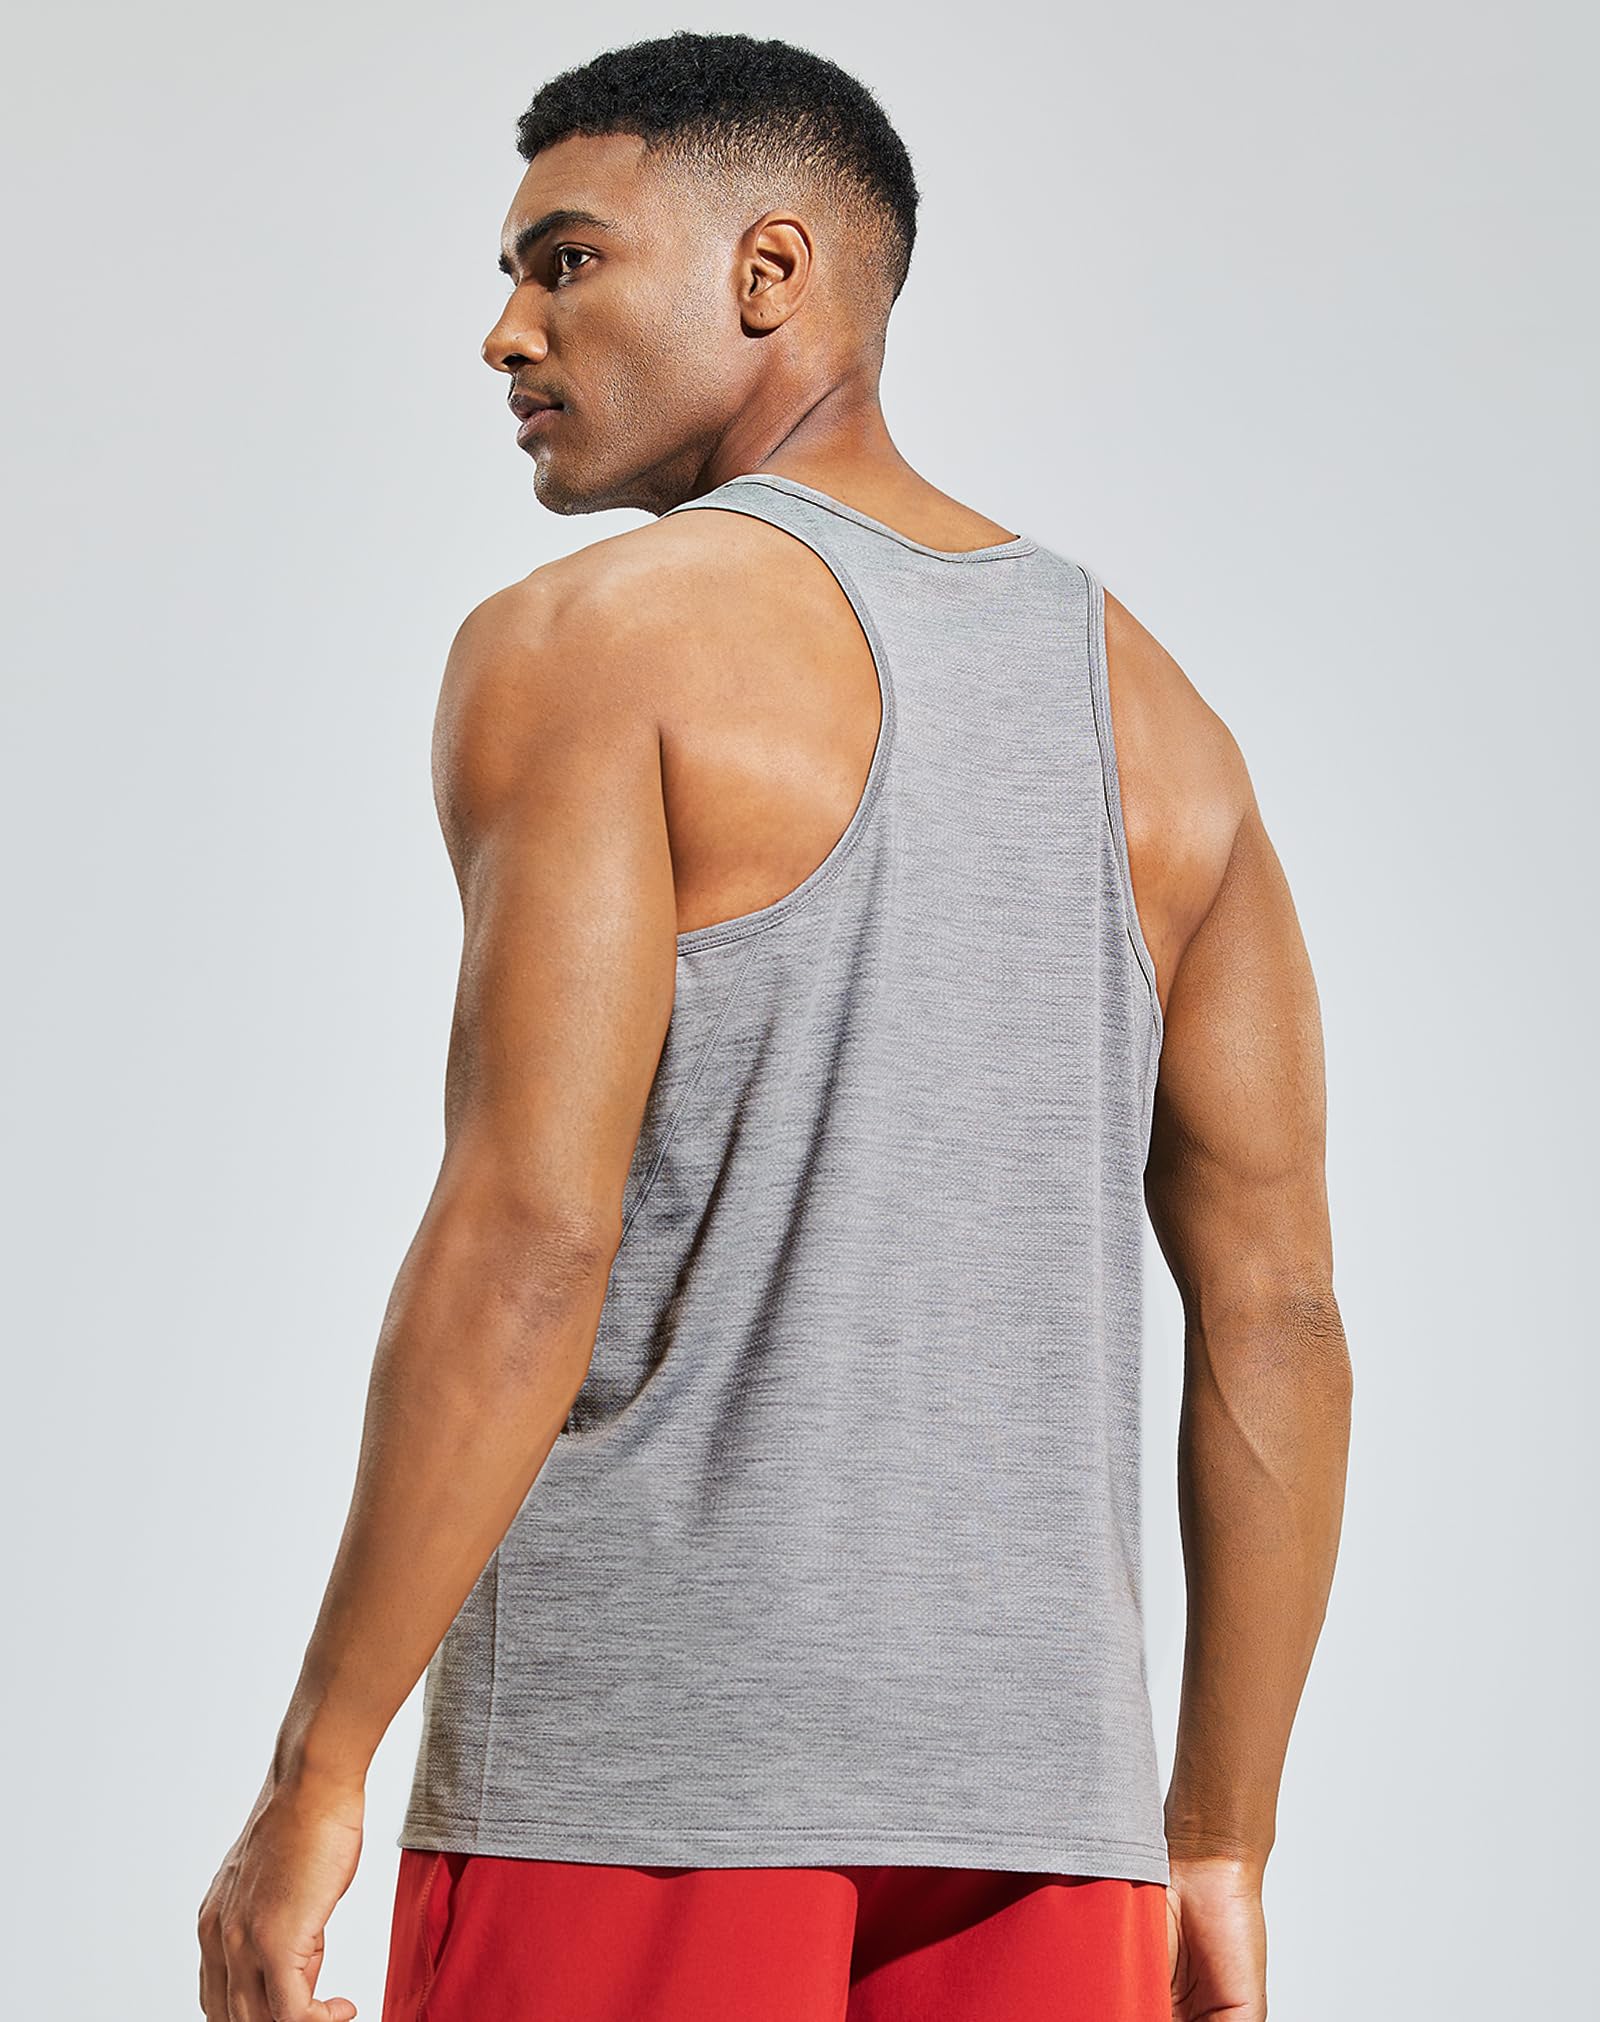 MIER Men's Sleeveless Workout Shirts Quick Dry Athletic Tank